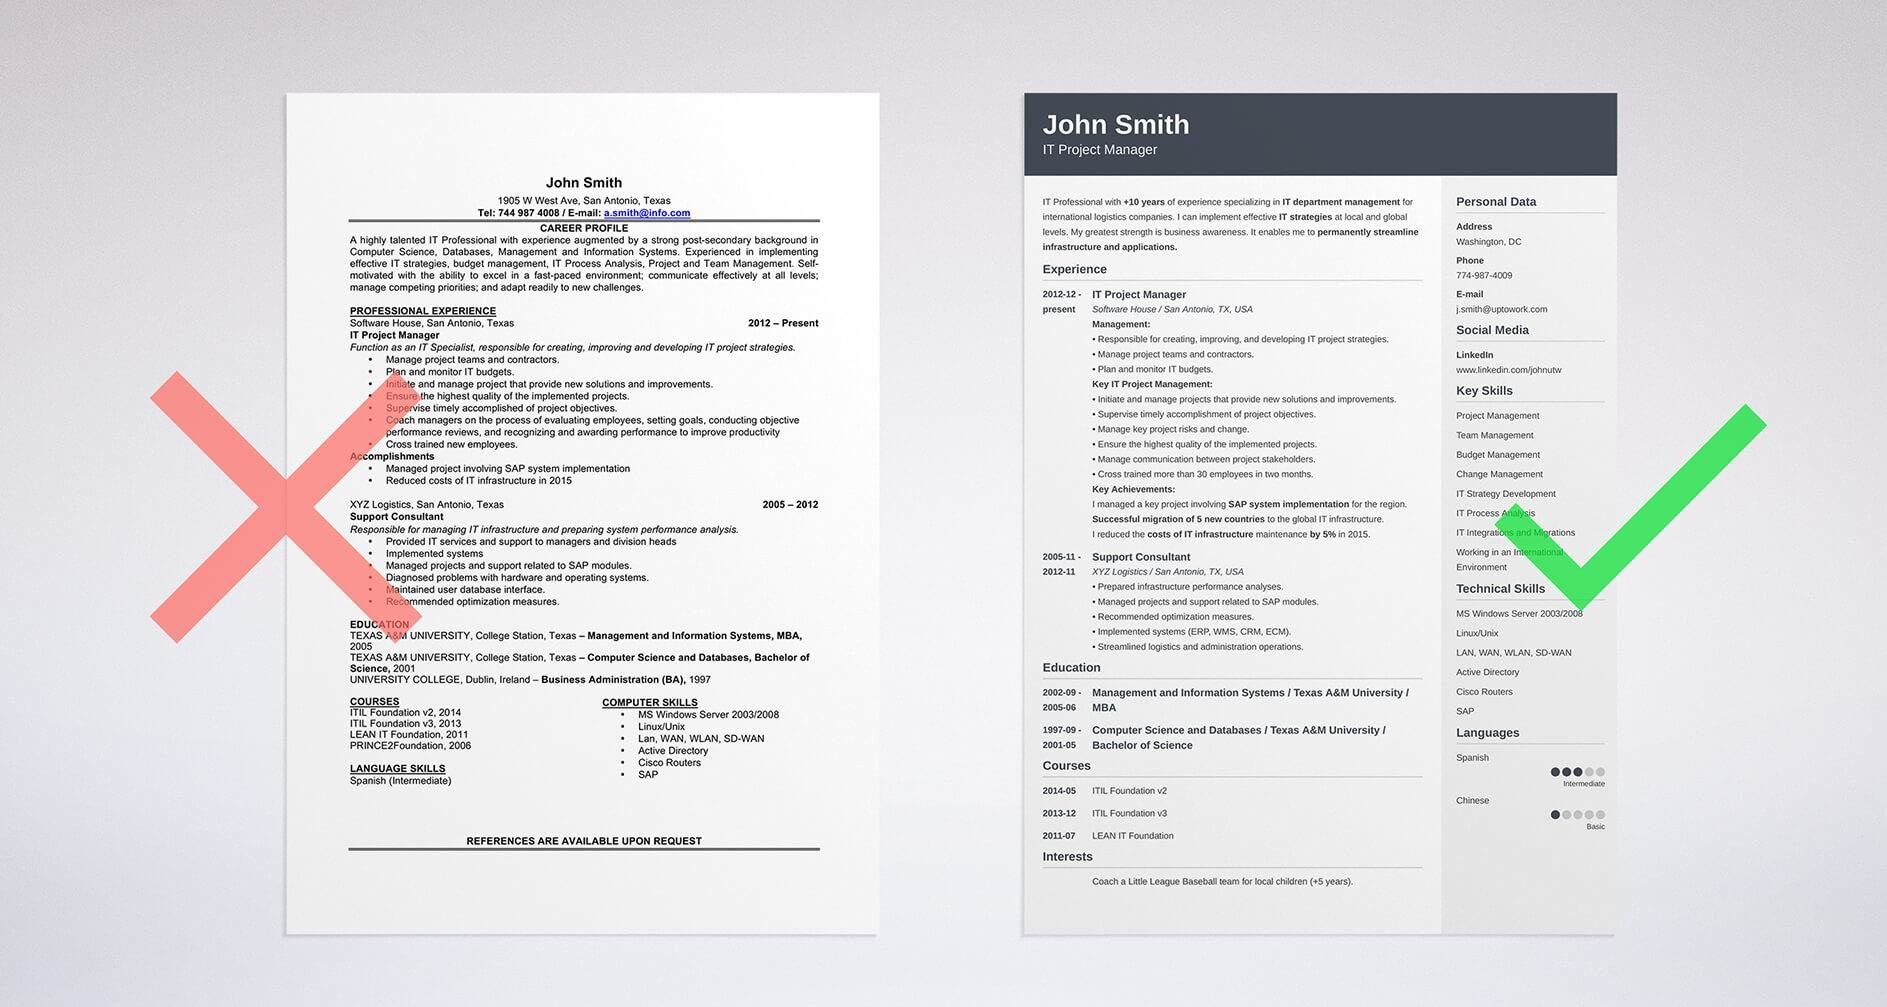 Sample Email to Send Resume to Friend S Friend How to Email A Resume to An Employer: 12lancarrezekiq Email Examples